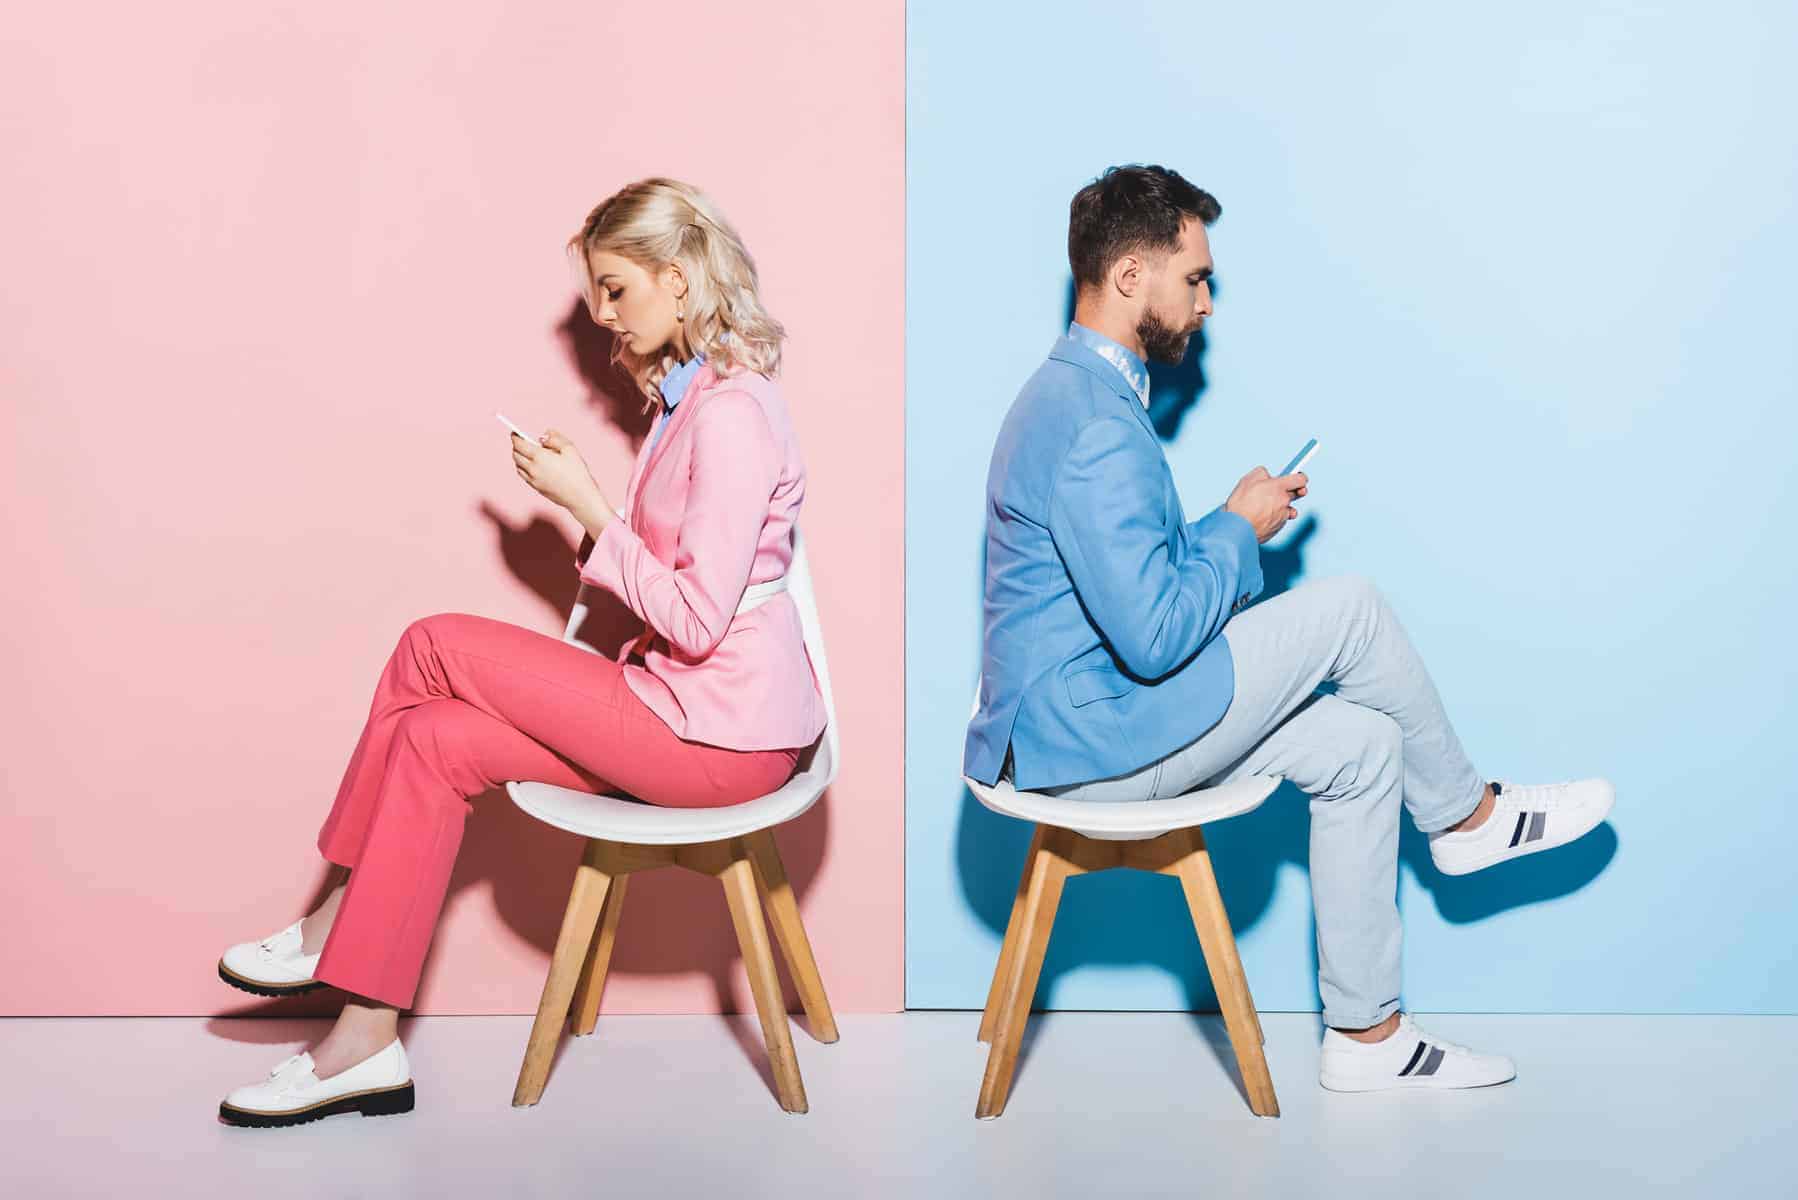 A man and a woman sitting on chairs looking at their phones